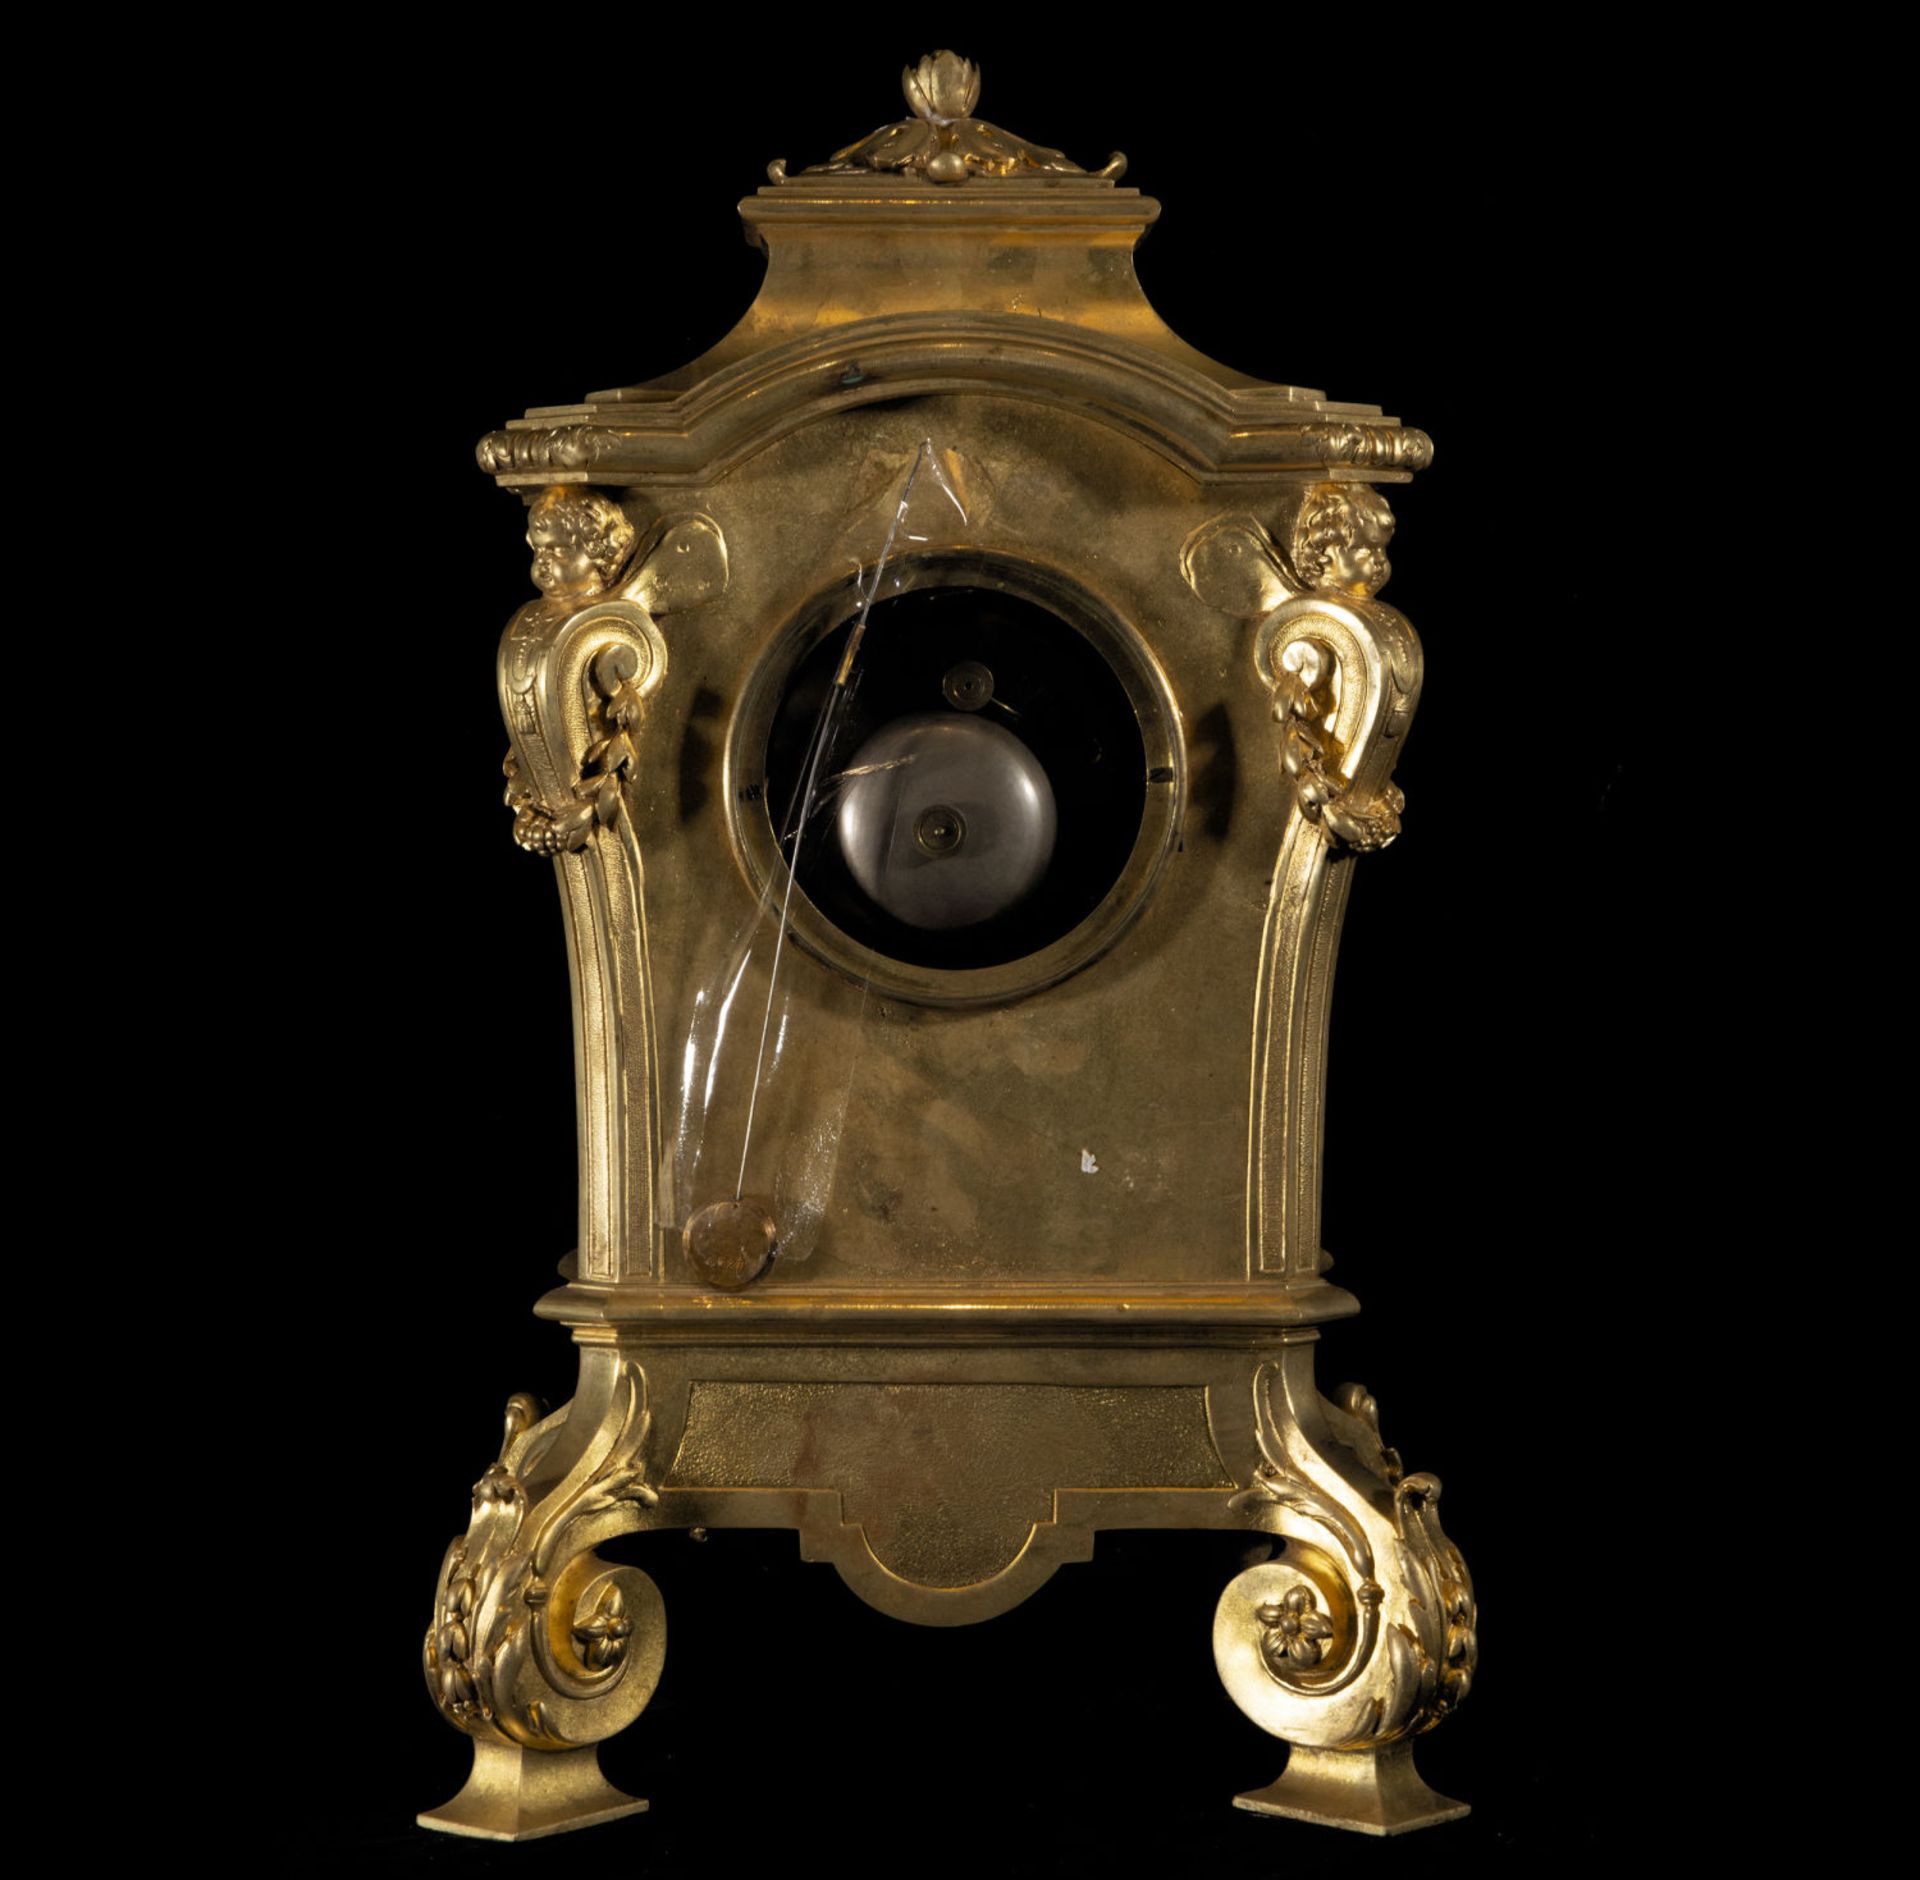 French Napoleon III Portico table clock in mercury gilded bronze from the 19th century - Image 6 of 6